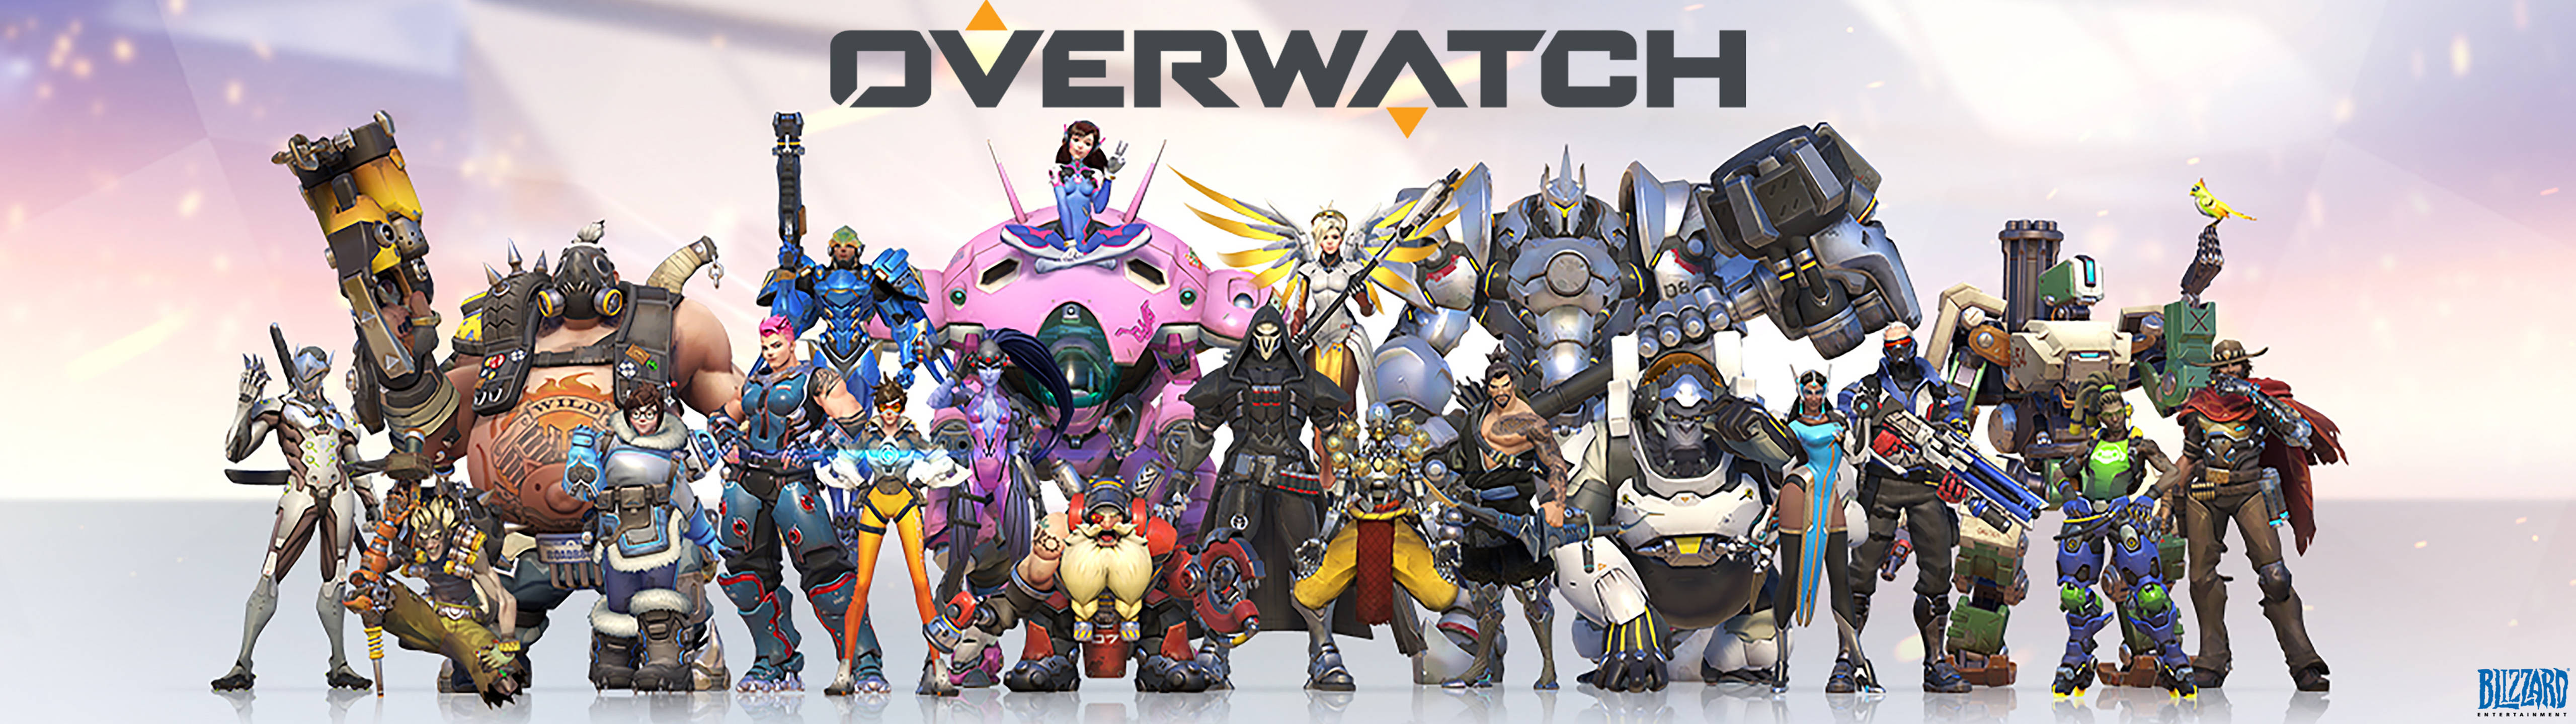 5120x1440 Game Overwatch Characters Wallpaper